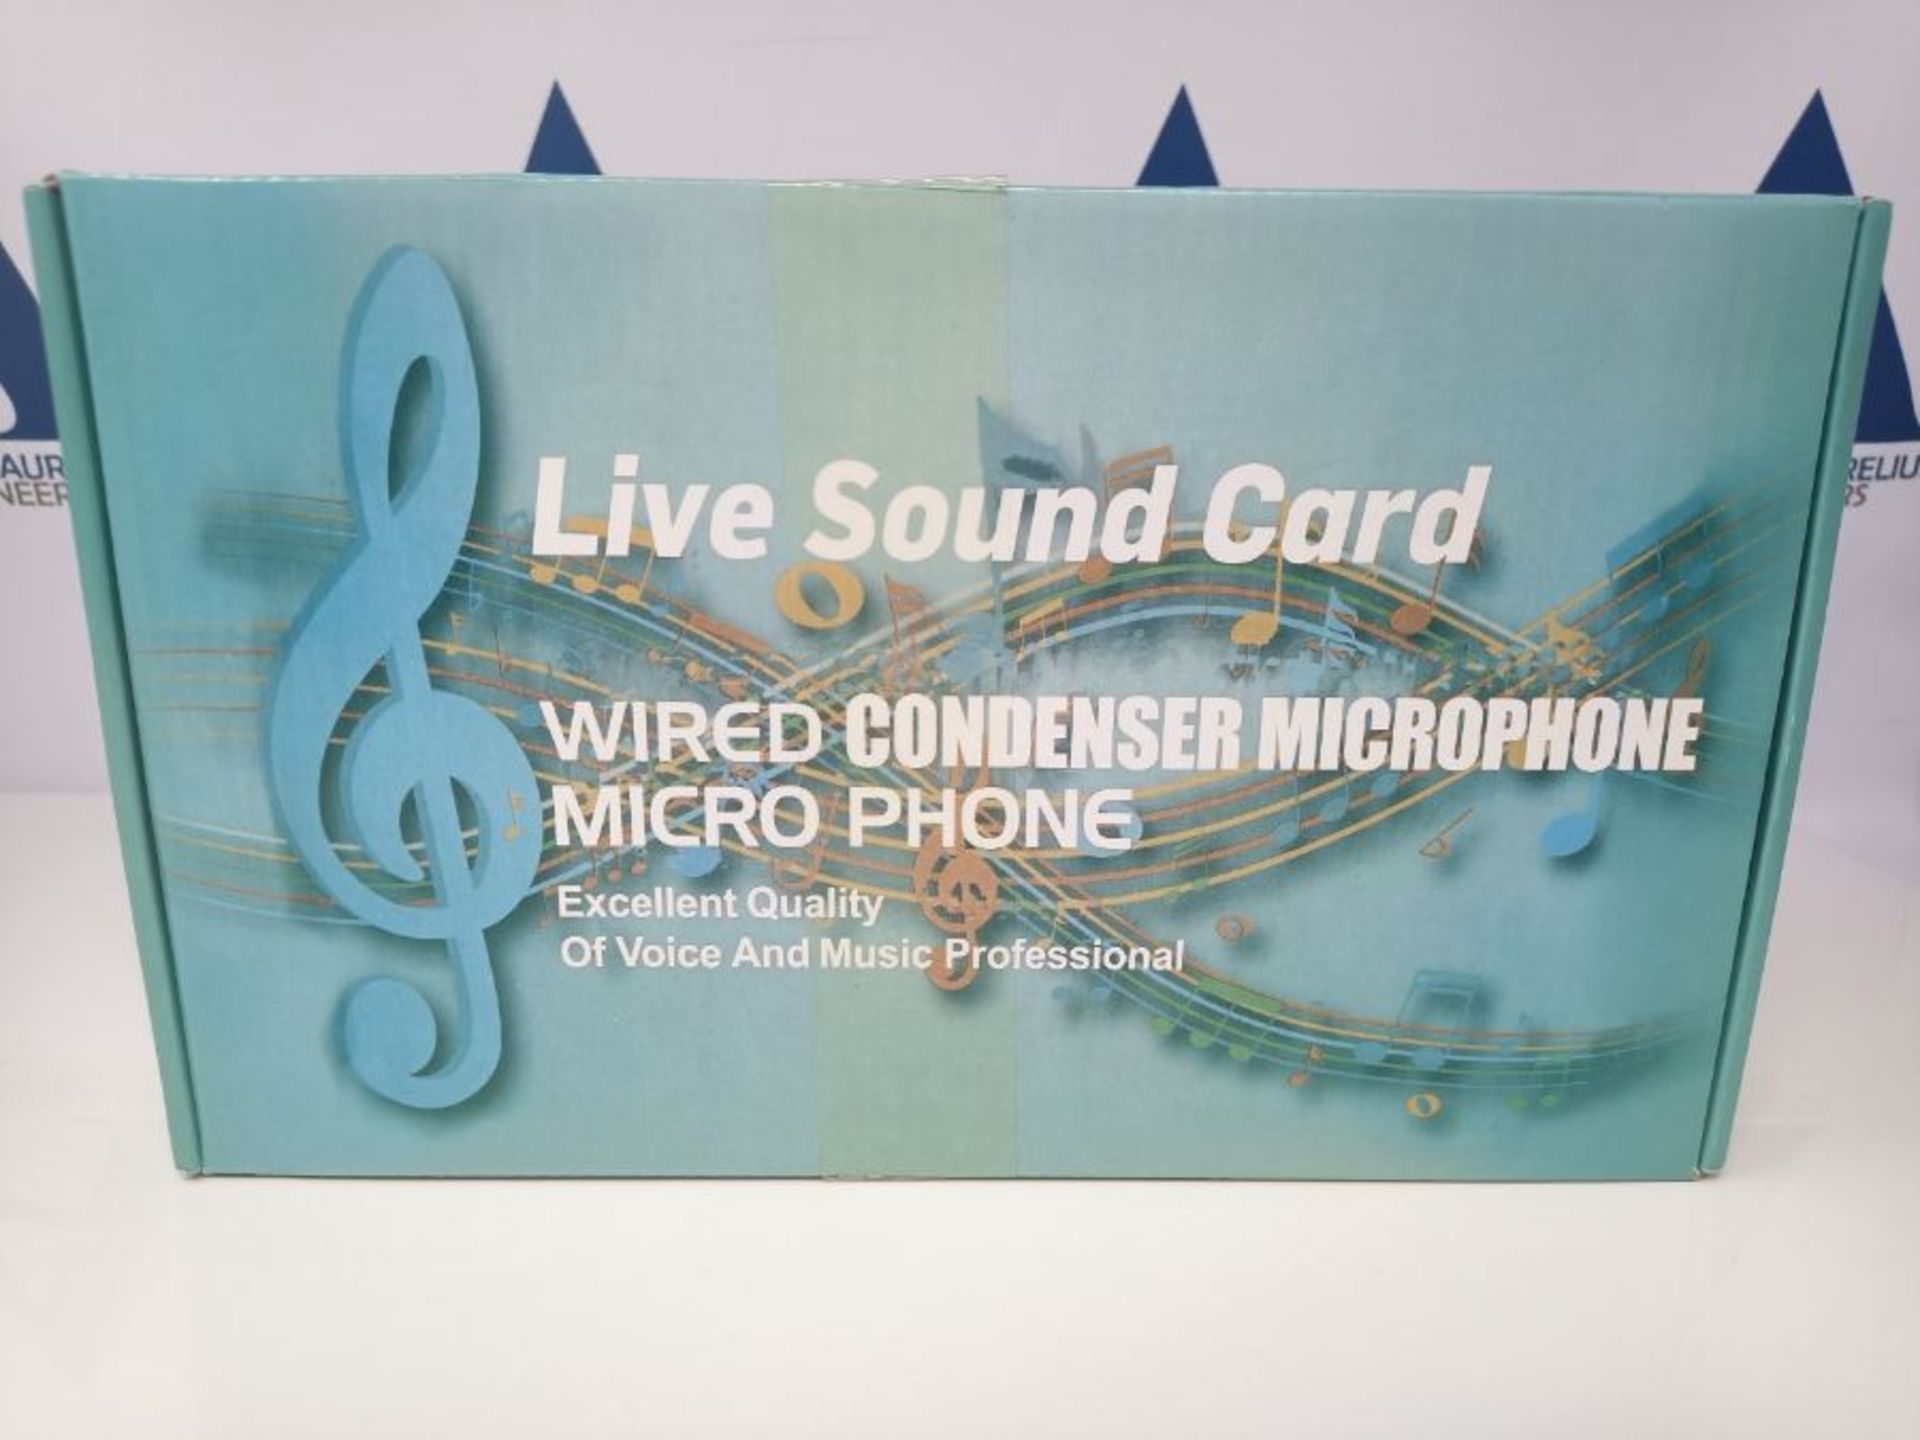 RRP £50.00 External Sound Cards, USB Portable Live Sound Card with 4 Modes, 23 Special Effects, H - Image 2 of 3